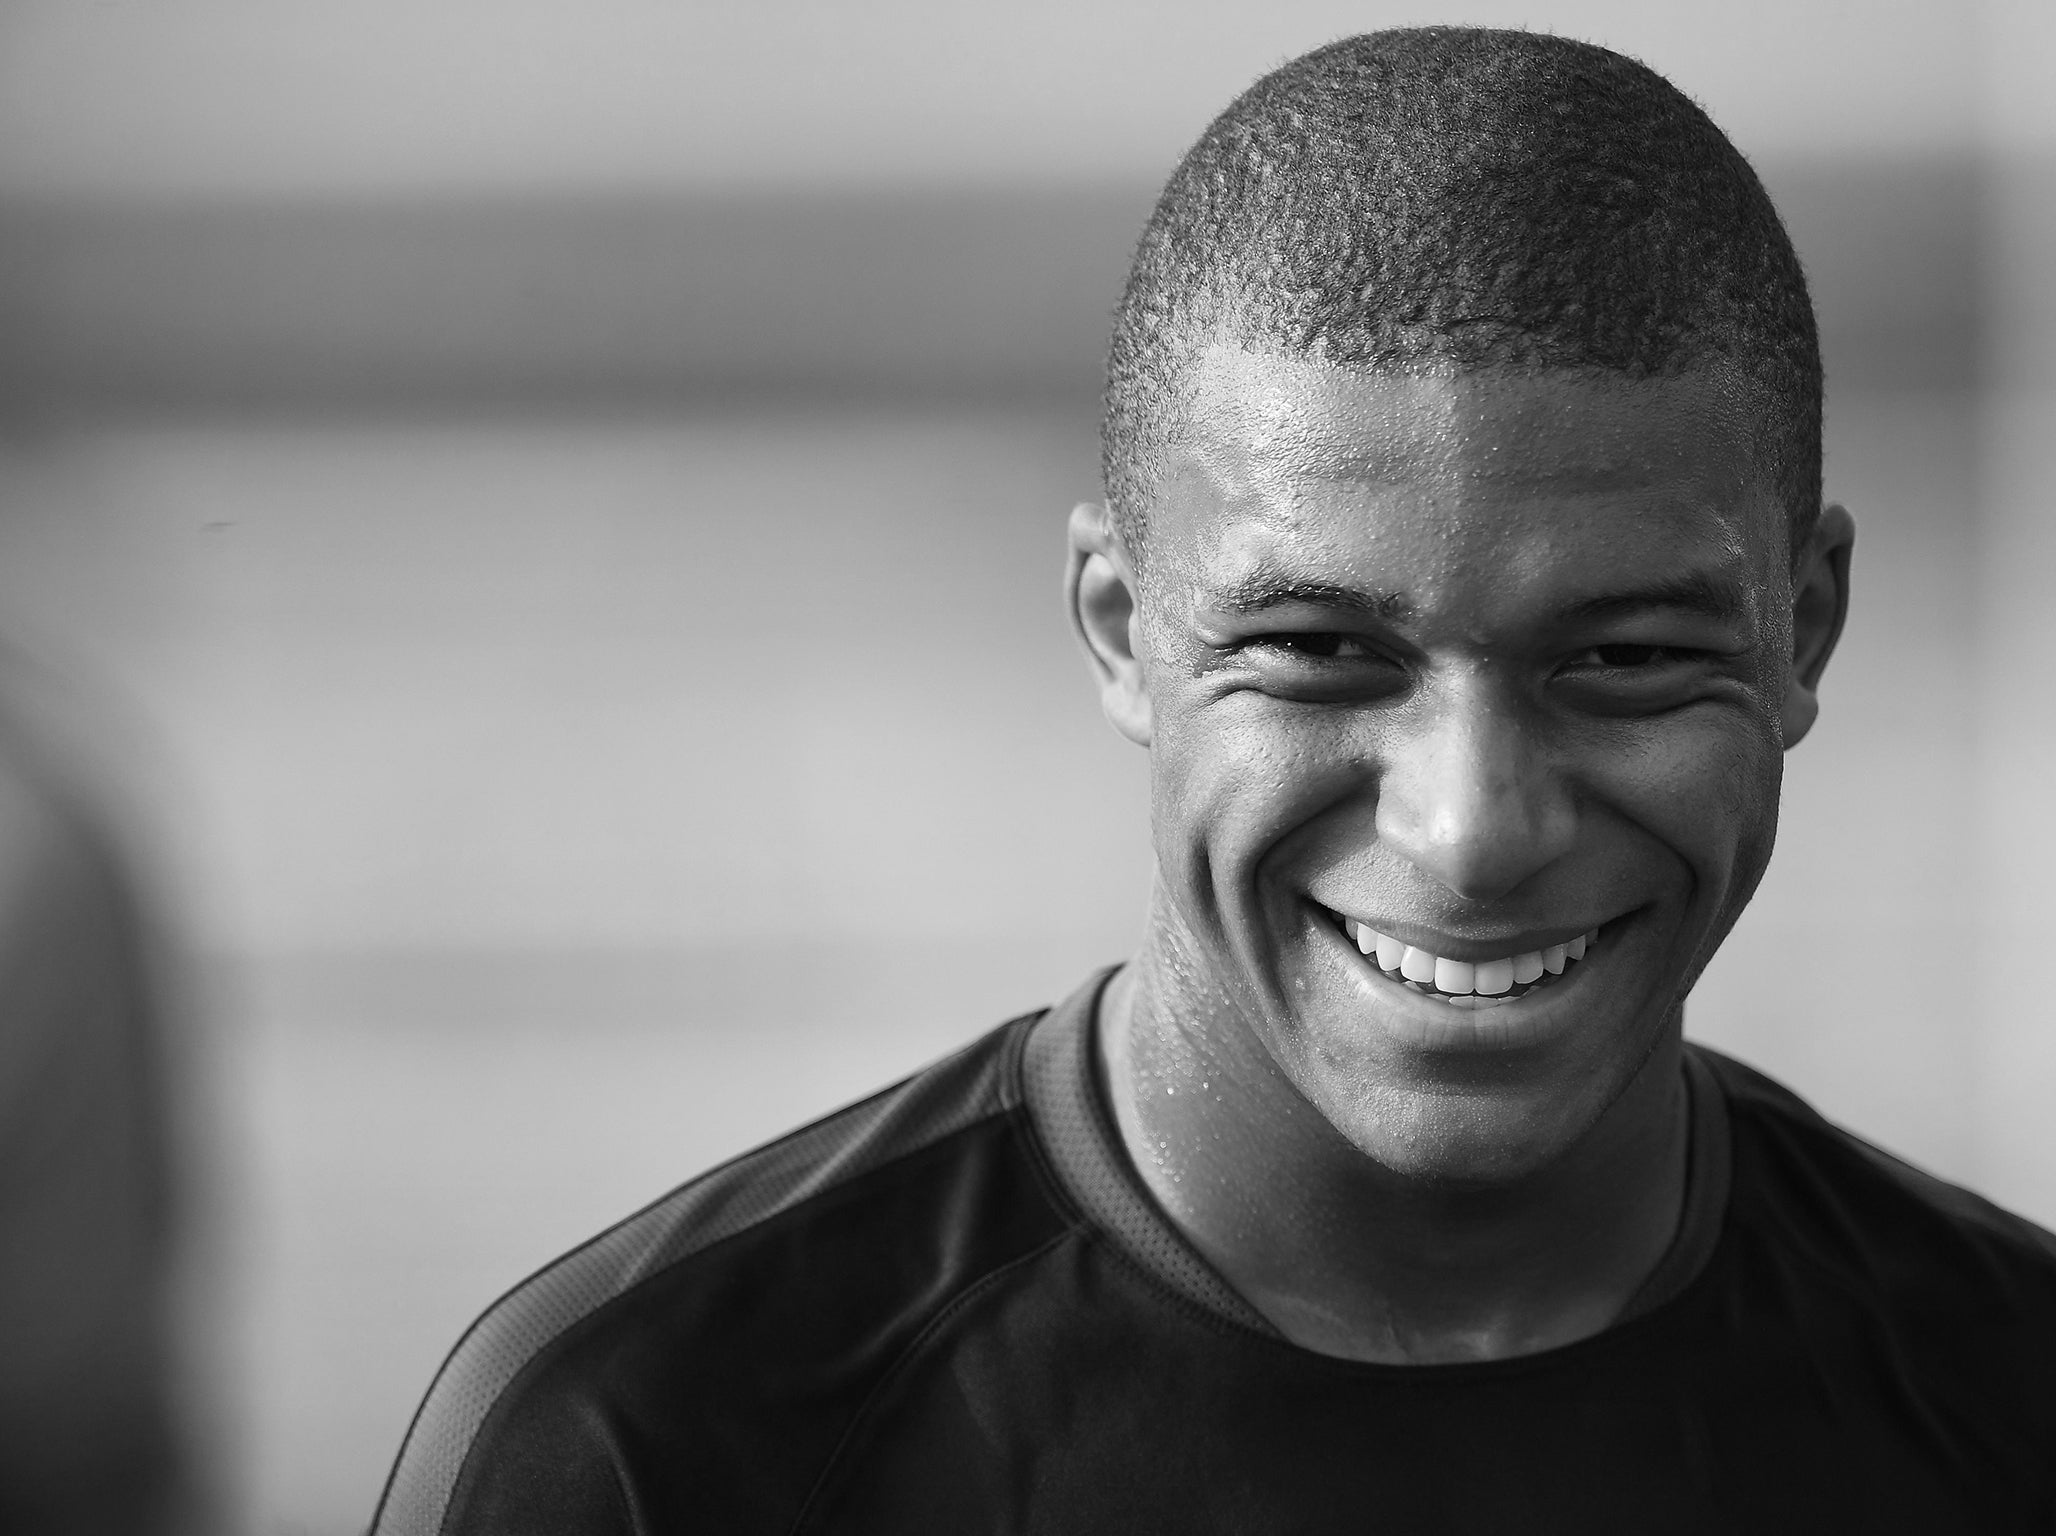 Mbappe is the most expensive teenager in the history of football